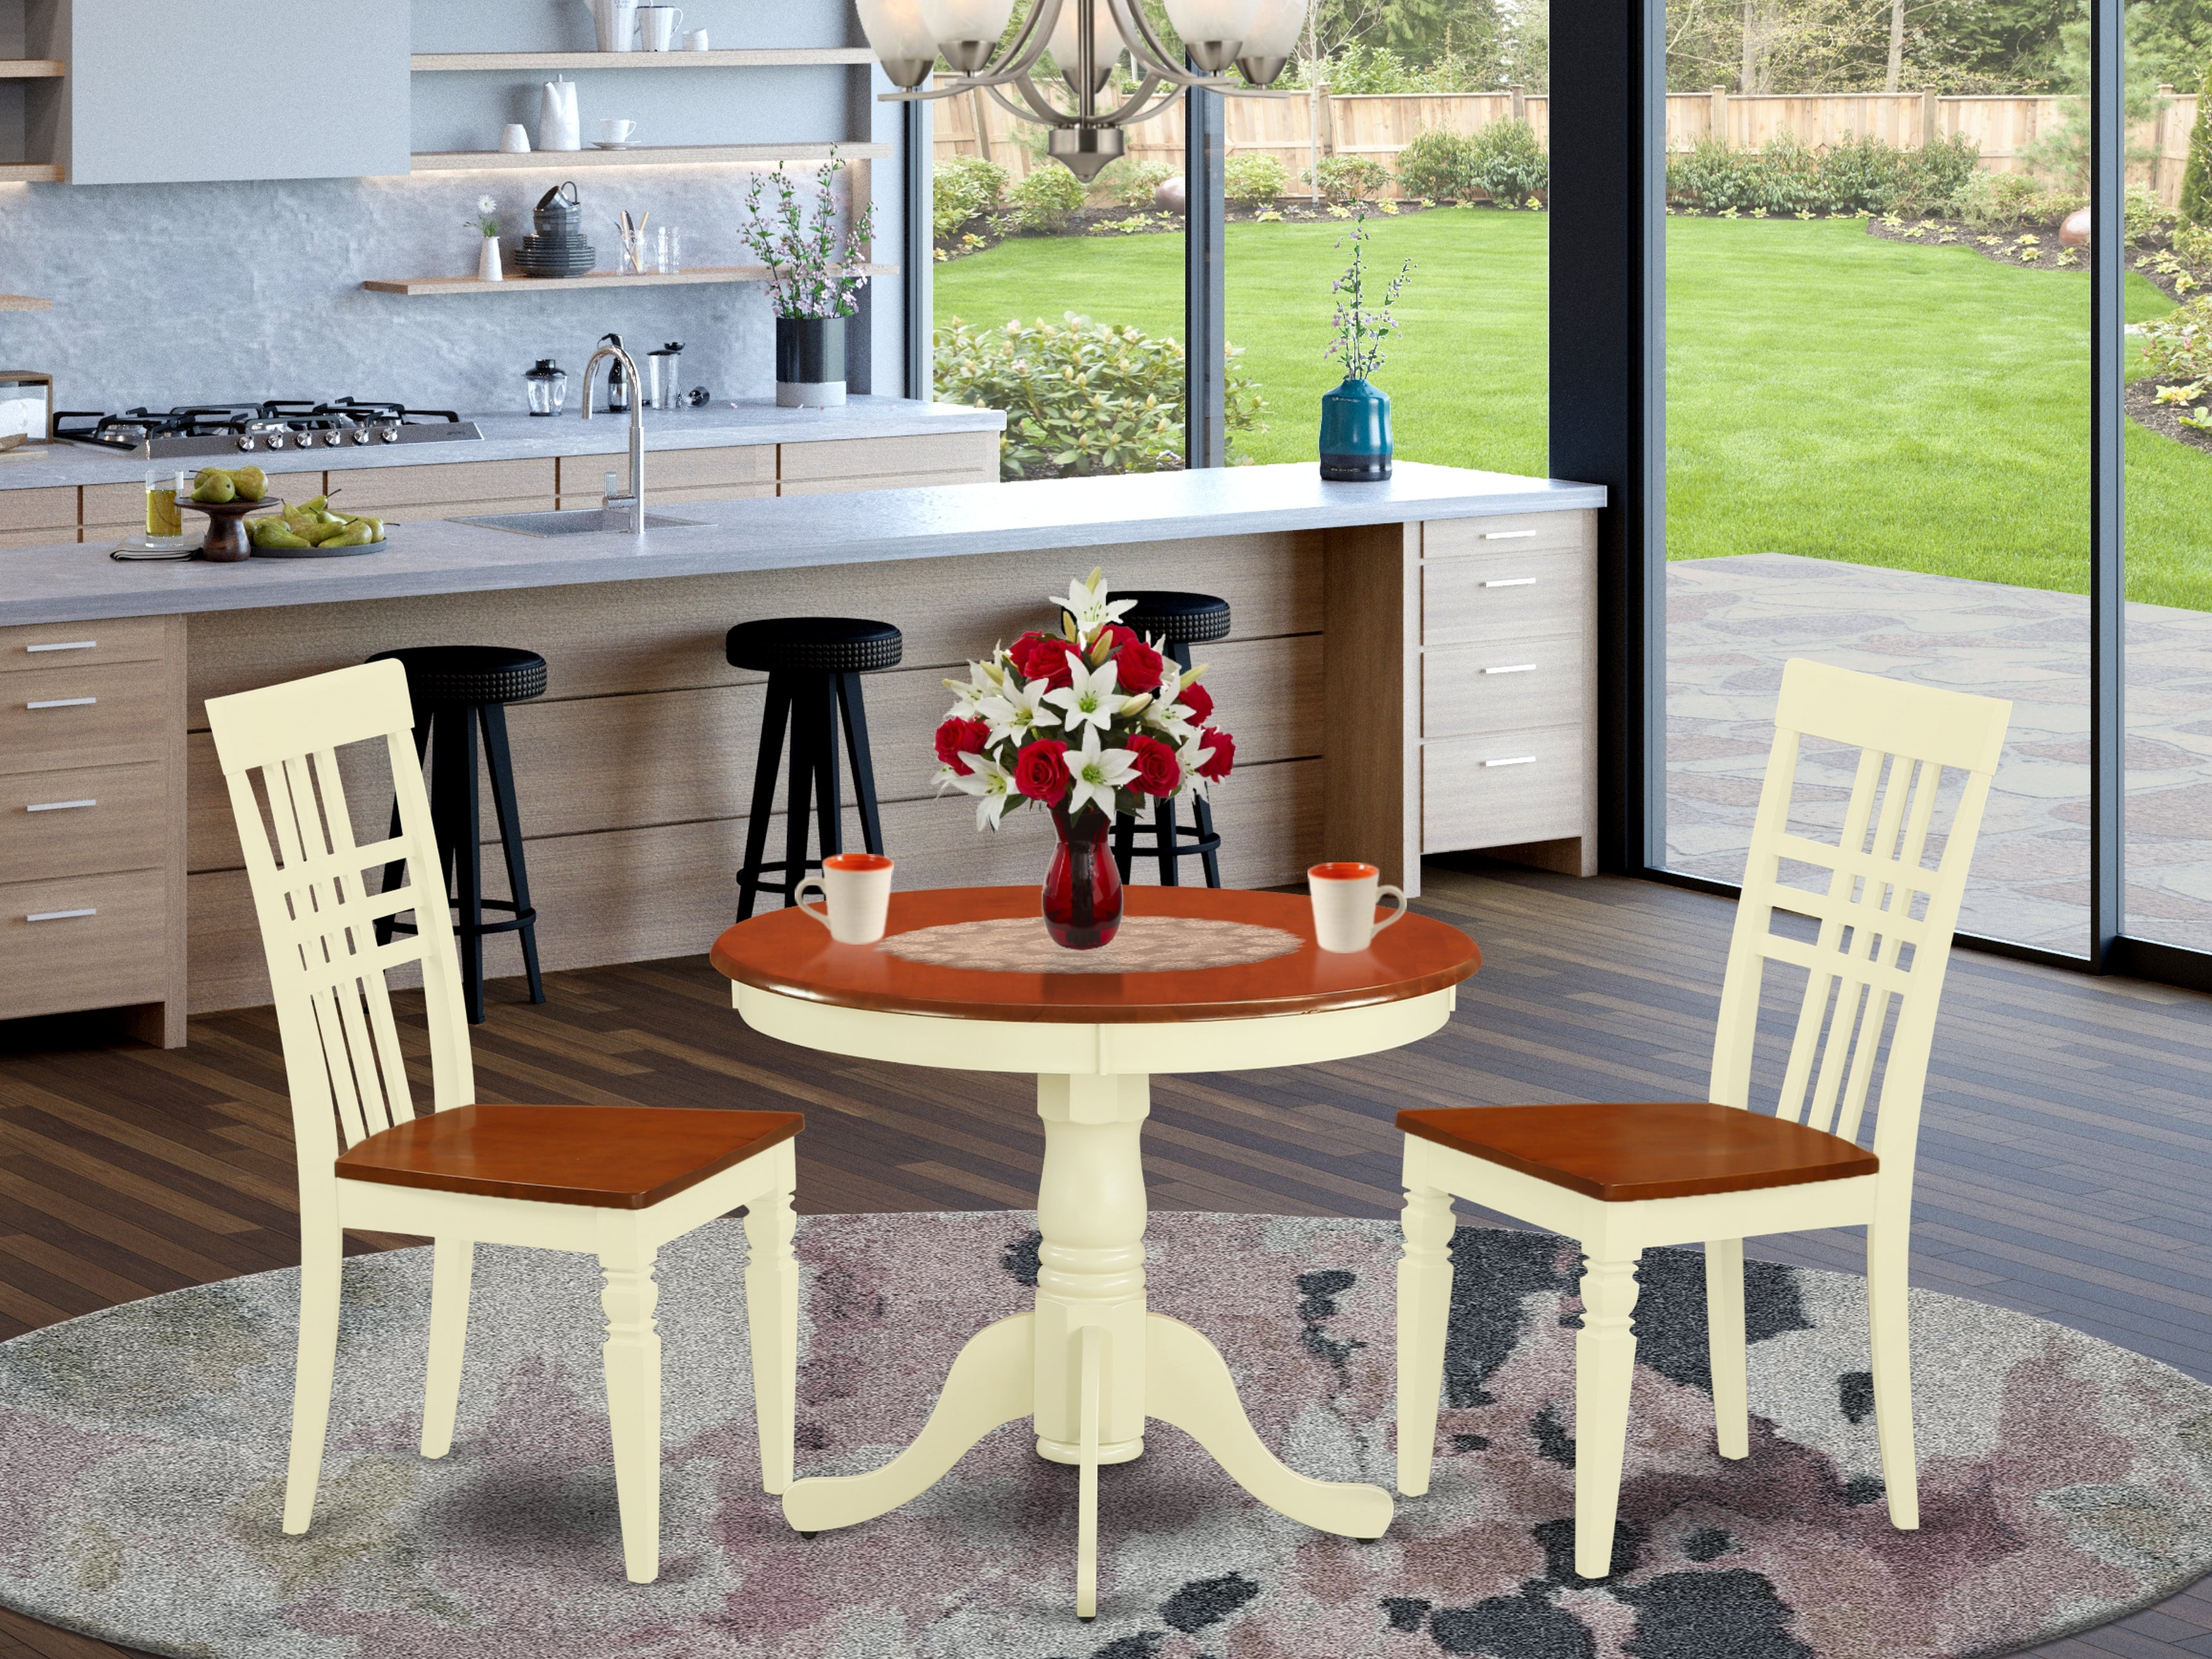 ANLG3-BMK-W 3 Pc Kitchen Table set with a Table and 2 Dining Chairs in Buttermilk and Cherry